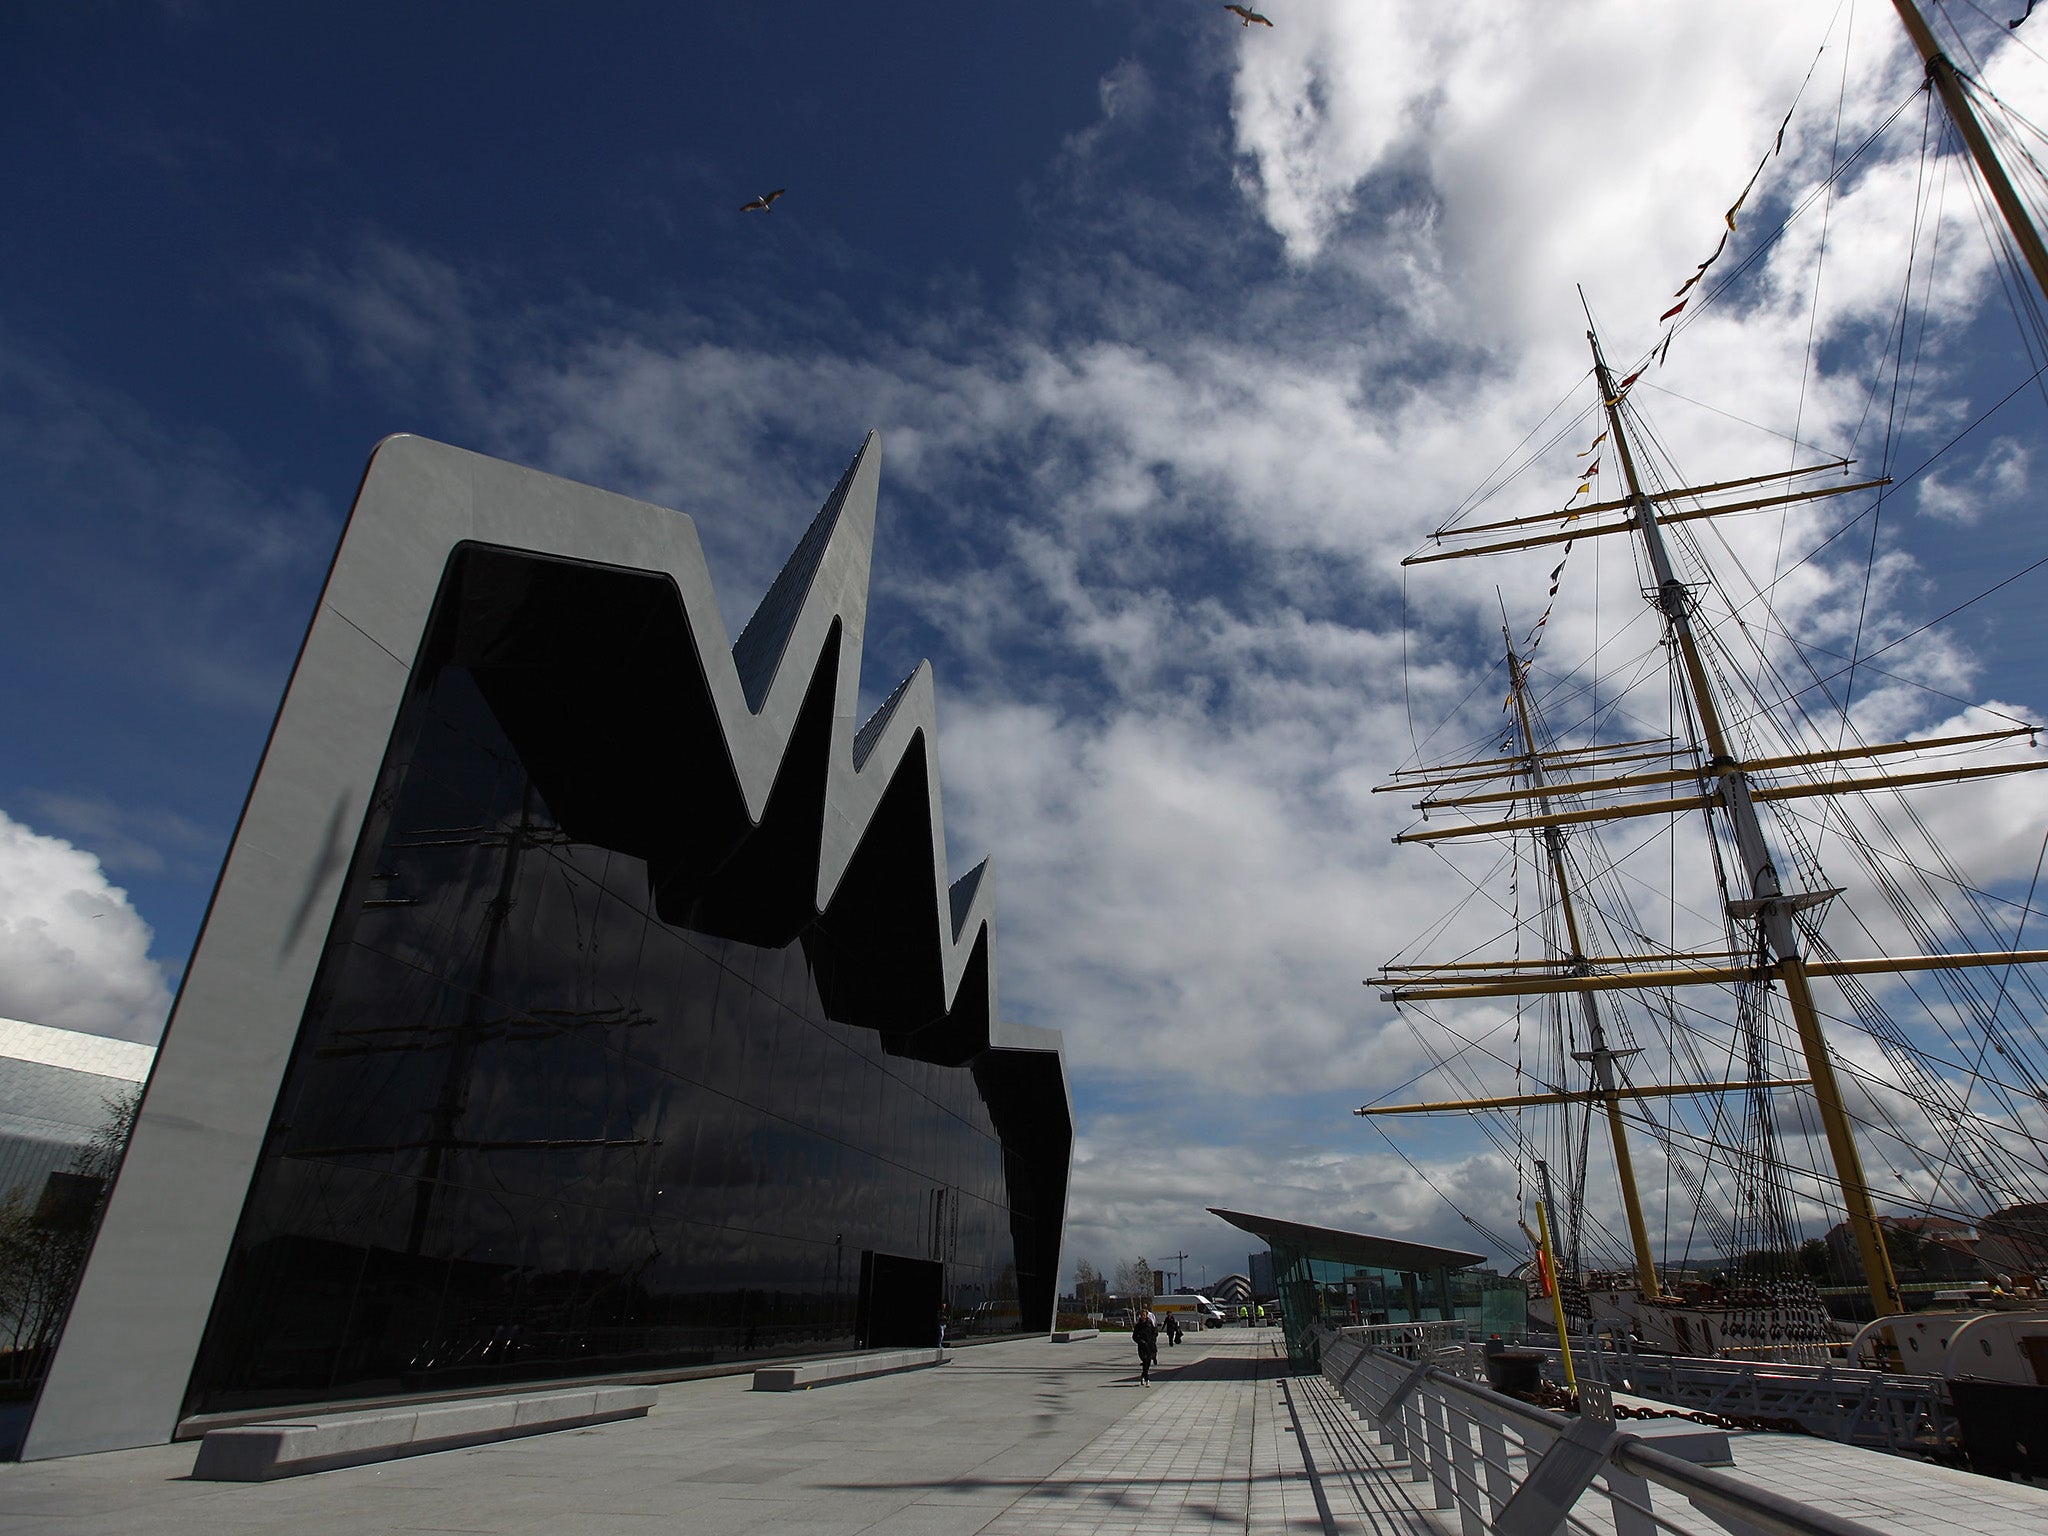 The £74m Riverside Museum in Glasgow saw visitor numbers increase by 42 per cent